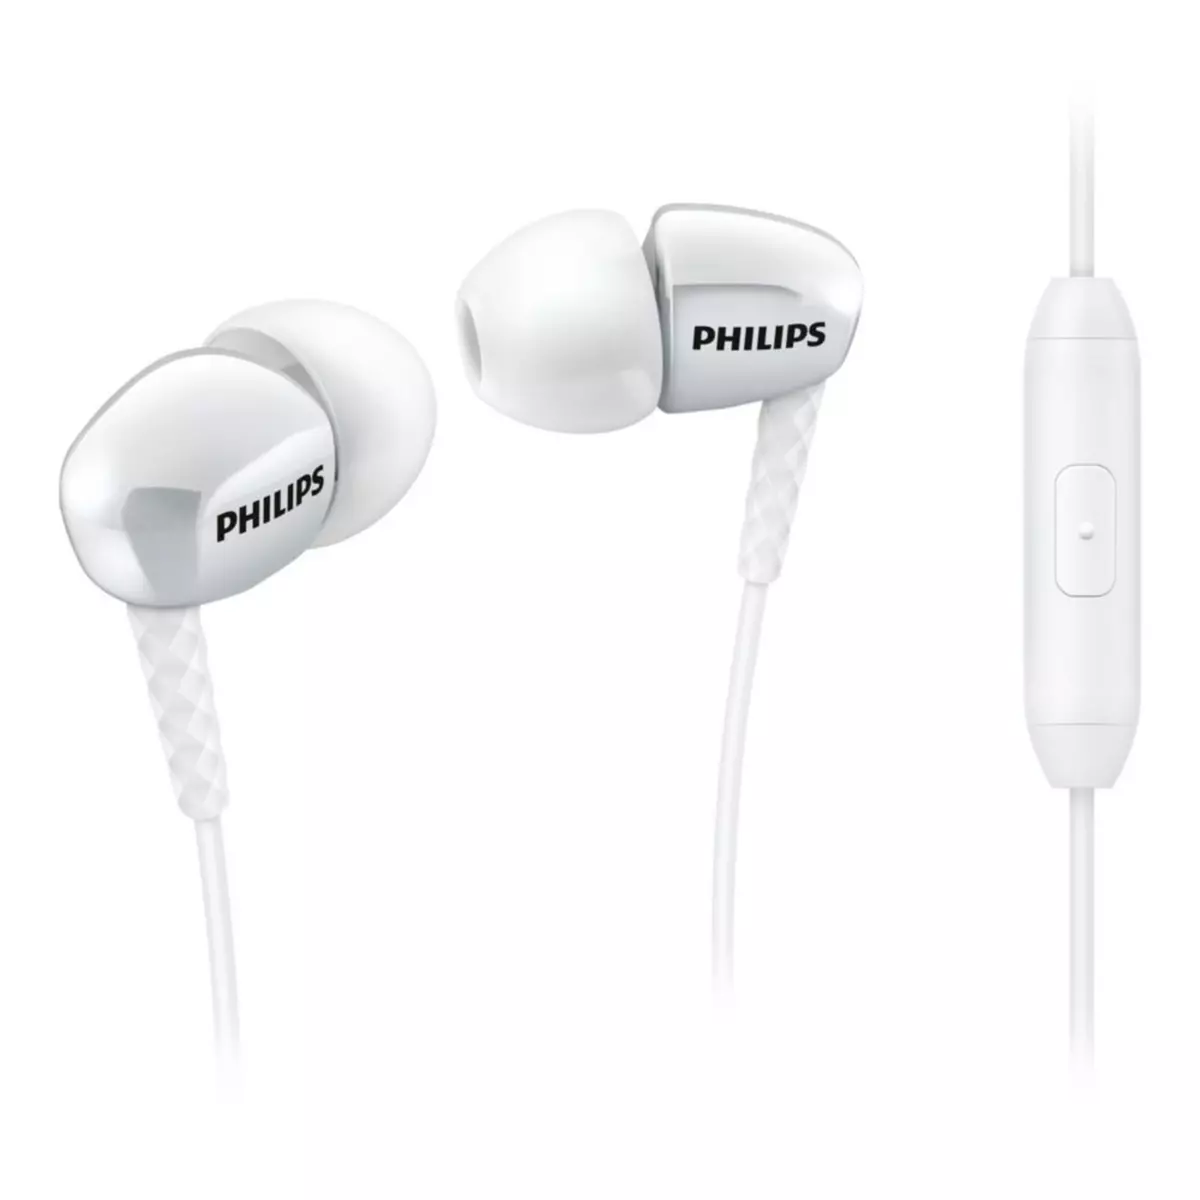 PHILIPS SHE3905 - Blanc - Ecouteurs